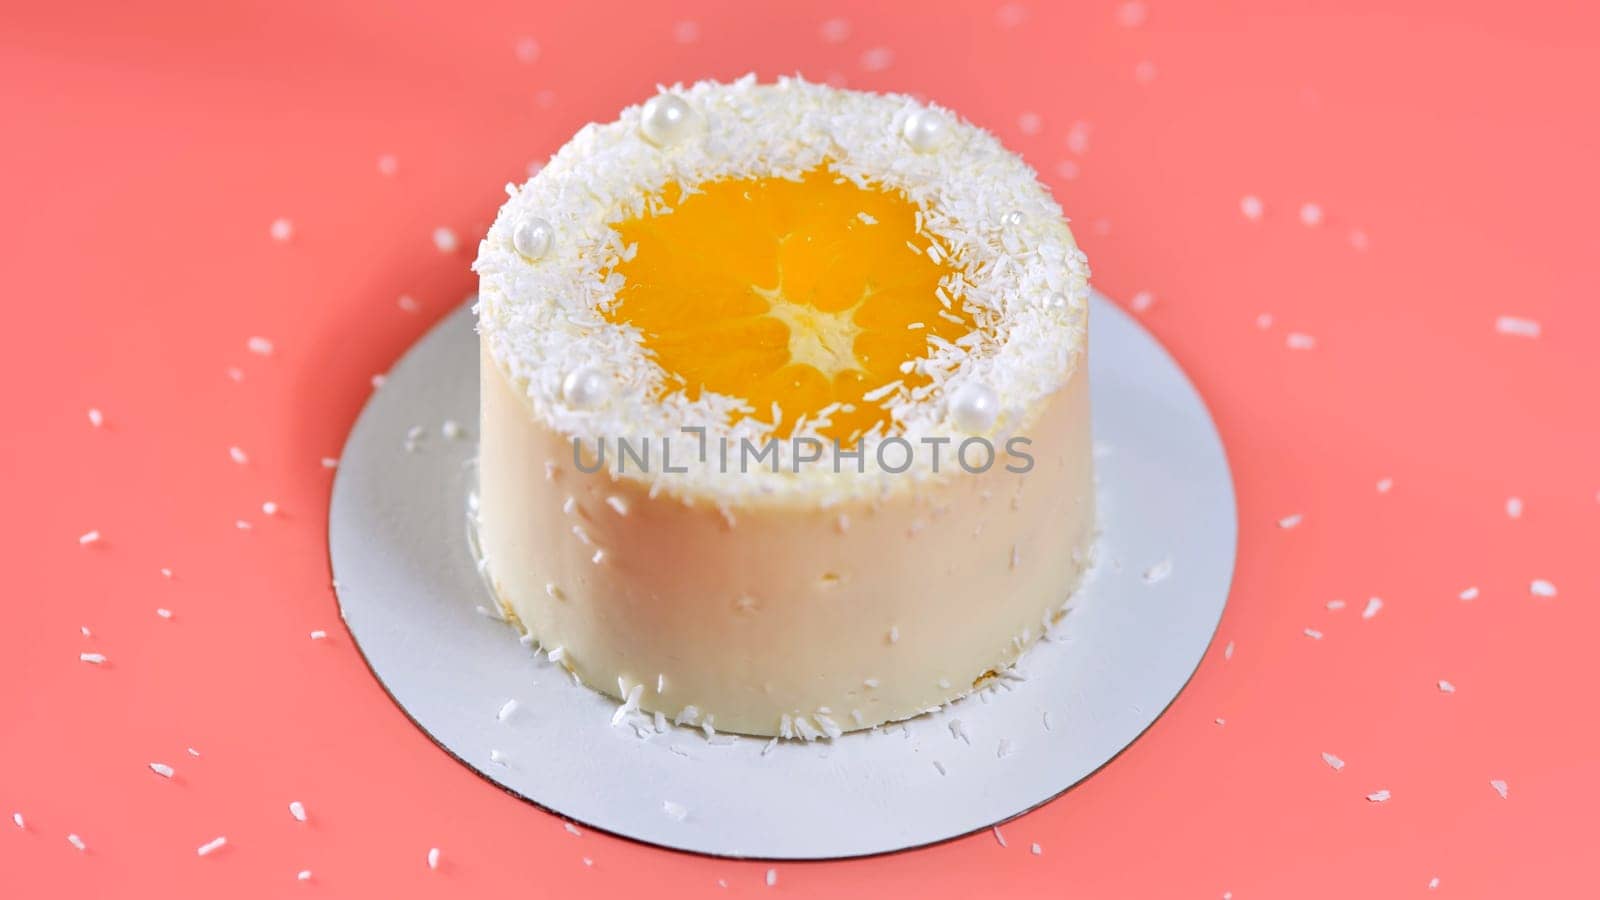 Cake with orange and coconut shavings spun on a pink background